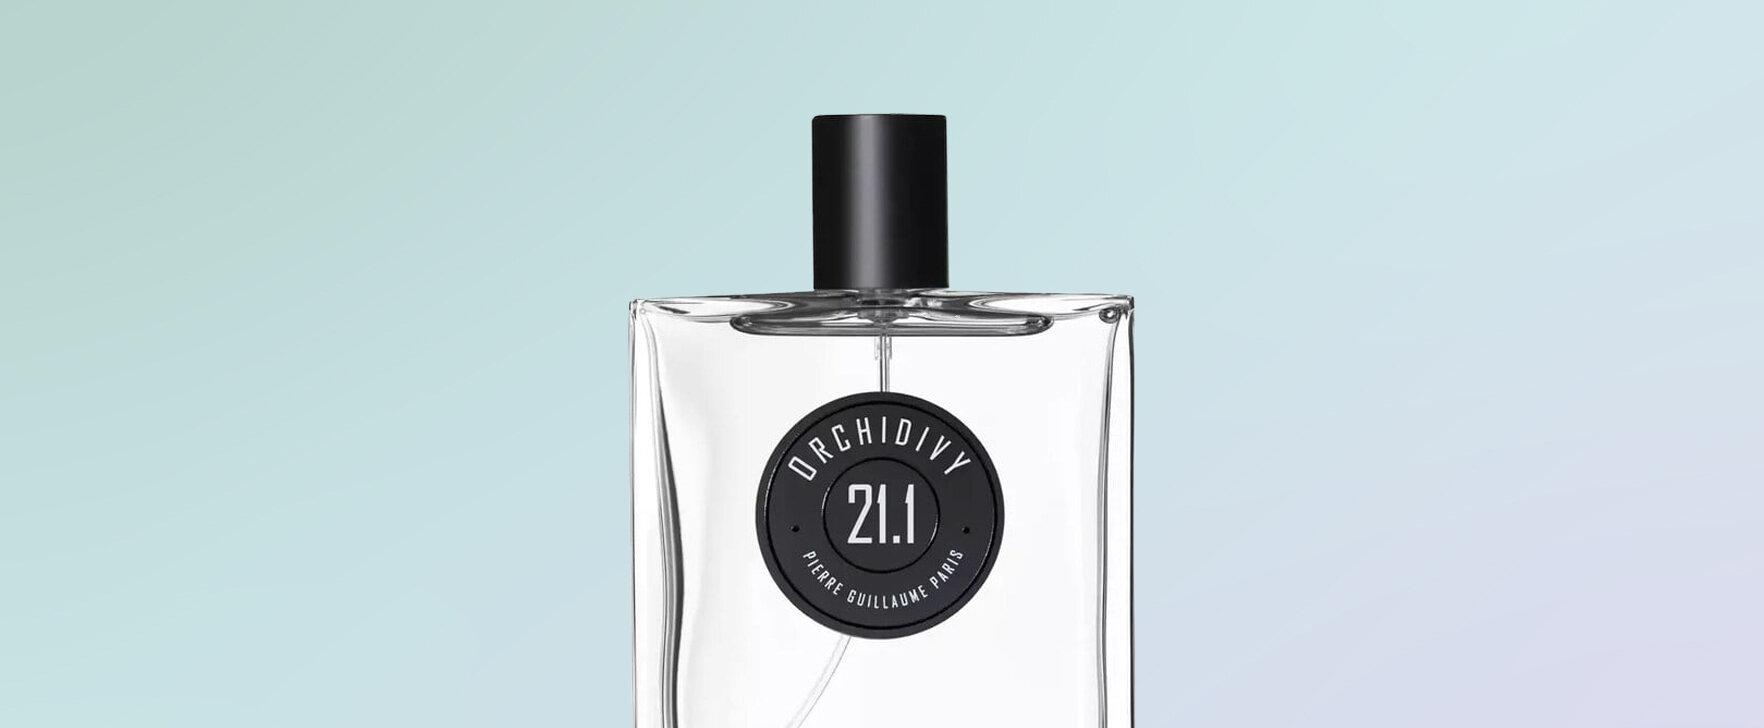 Ivy and Sweet Vanilla: The New Eau de Parfum 21.1 Orchidivy by Pierre Guillaume